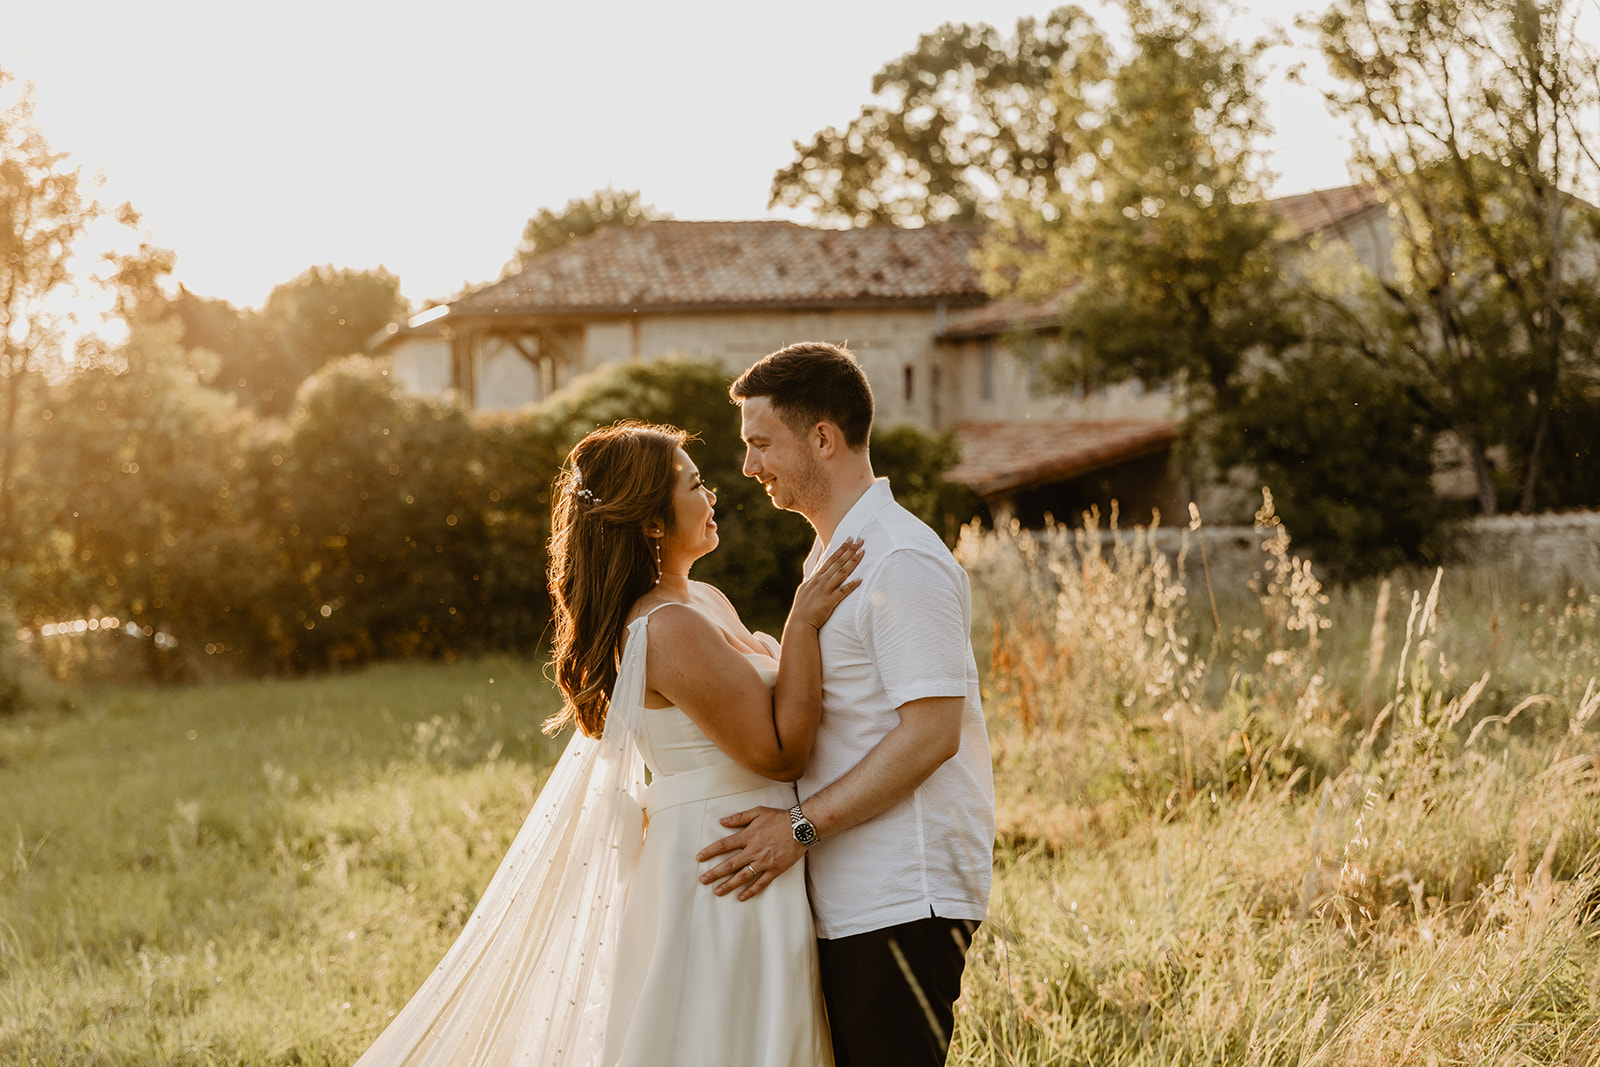 Bride and groom at golden hour at a Destination Wedding in France. Photography & Videography by OliveJoy Photography